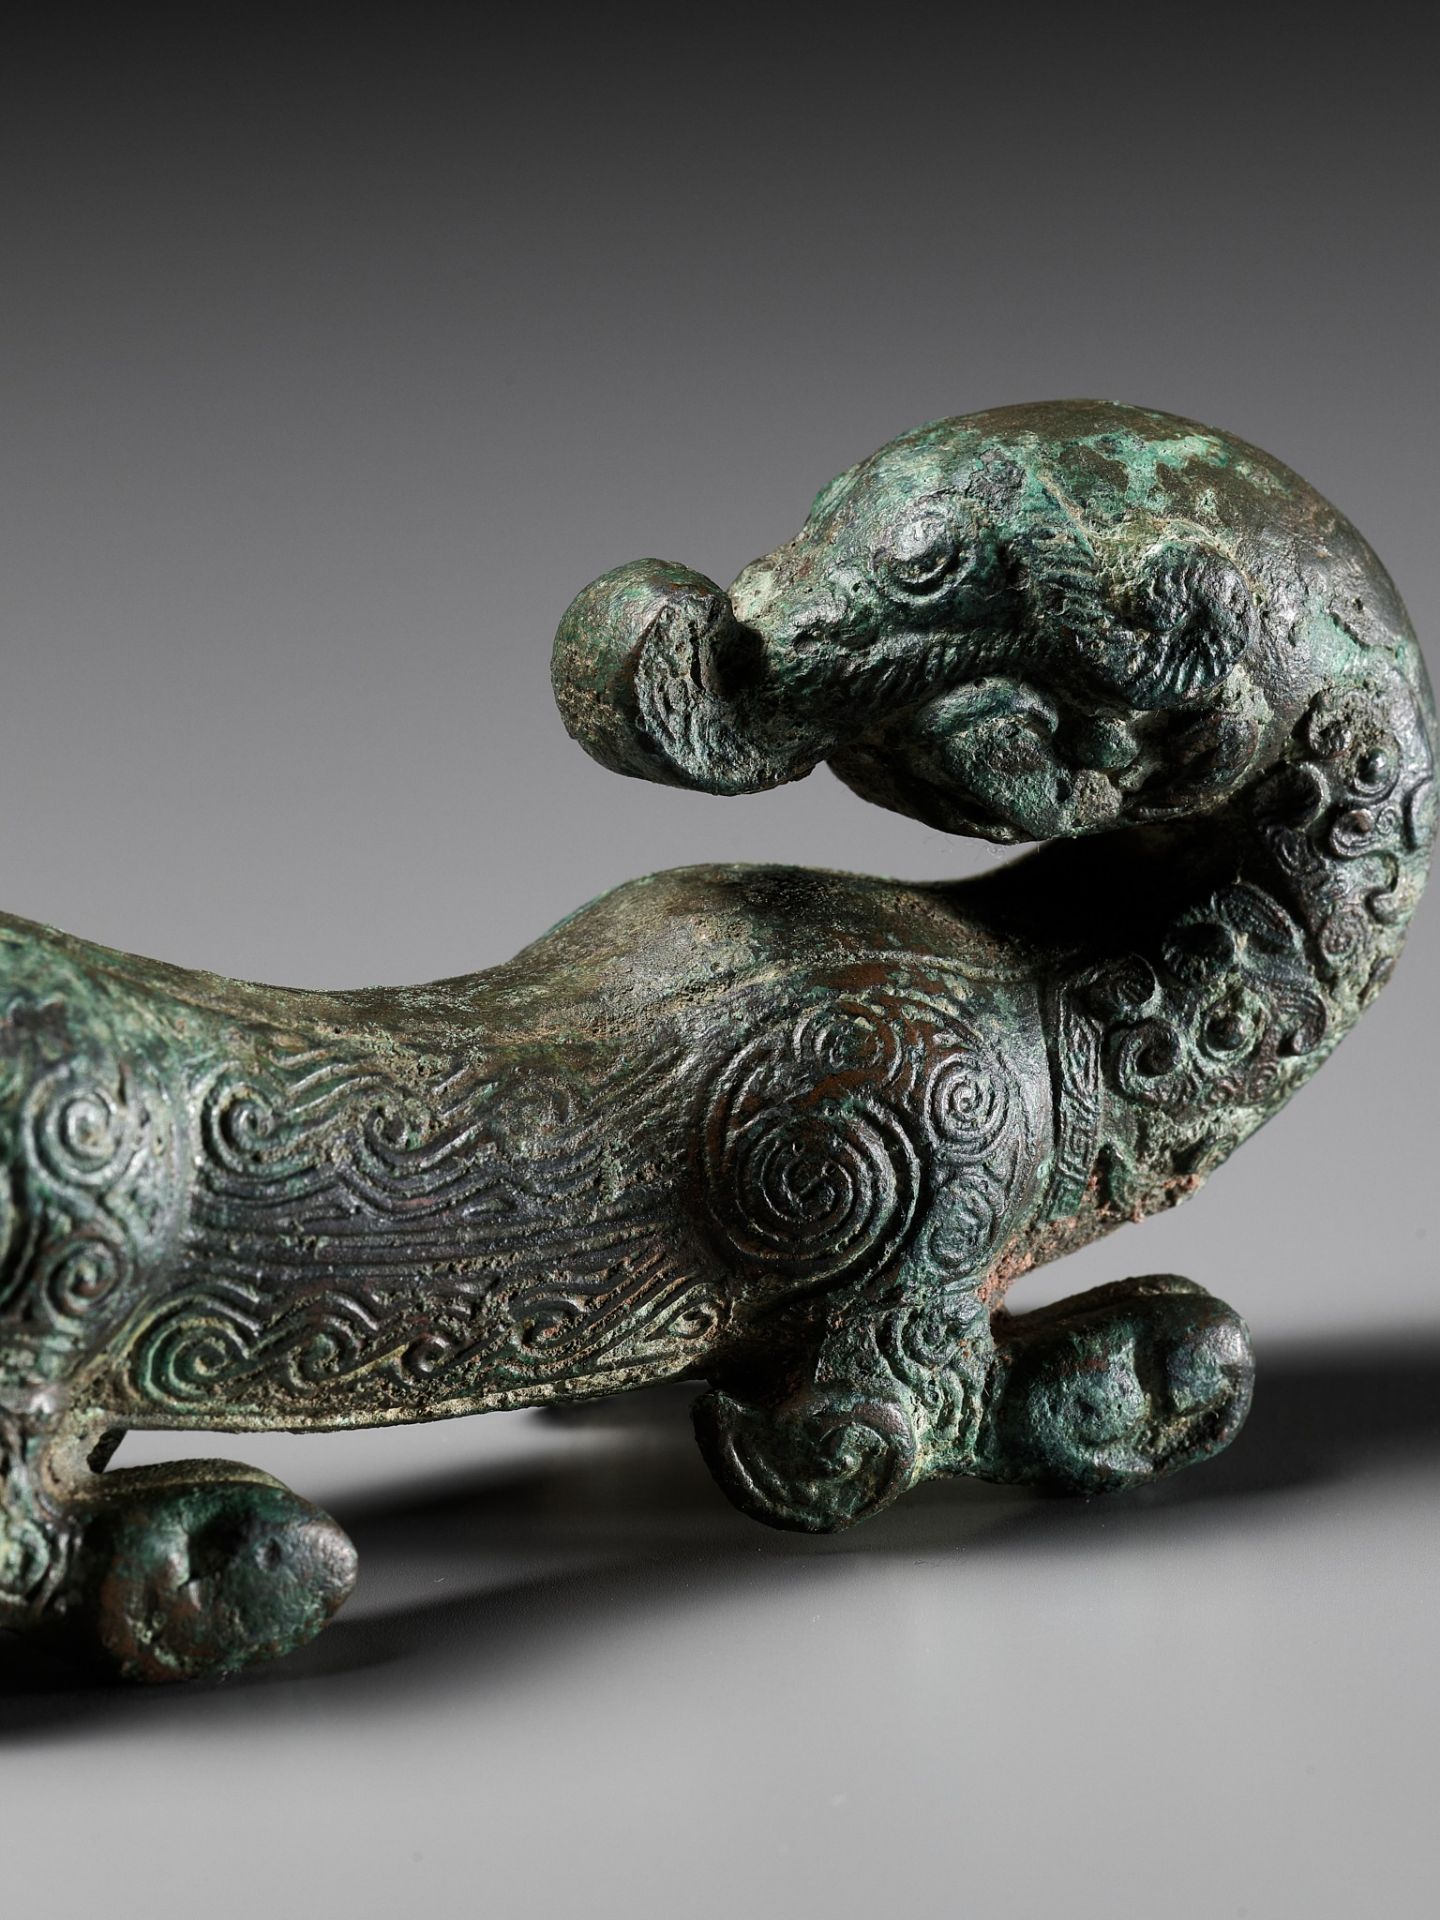 A SUPERB BRONZE FIGURE OF A DRAGON, EASTERN ZHOU DYNASTY, CHINA, 770-256 BC - Image 15 of 23